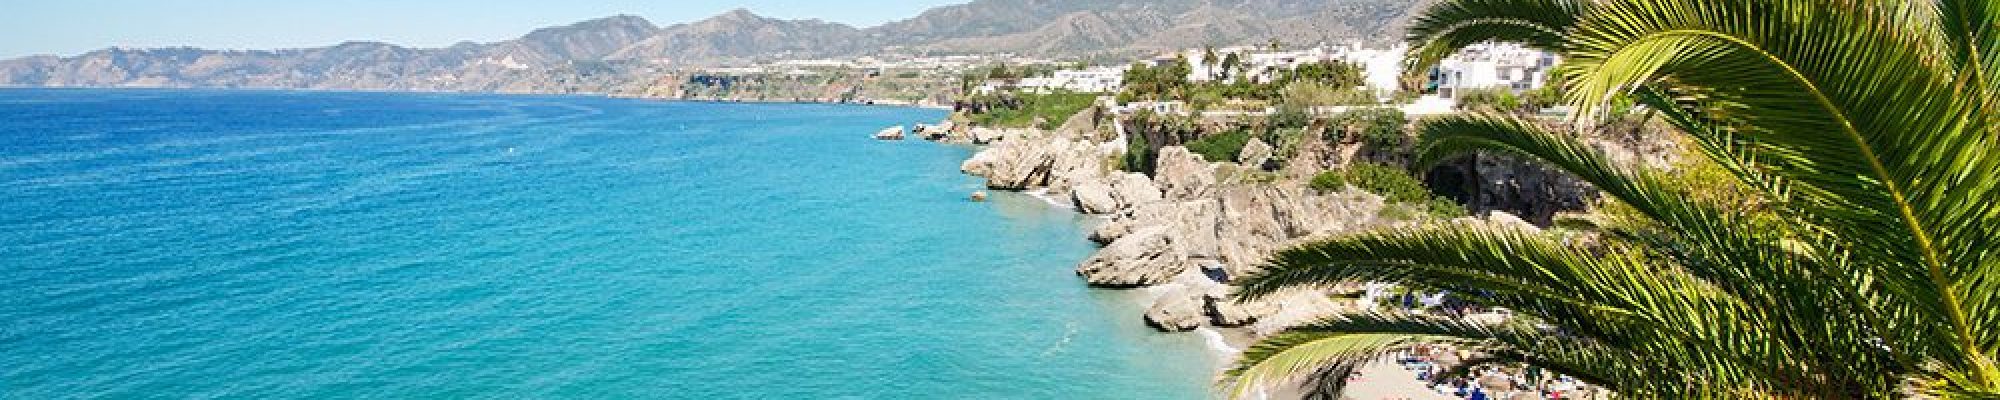 Nerja beach, famous touristic town in costa del sol, Málaga, Andalusia, Spain.